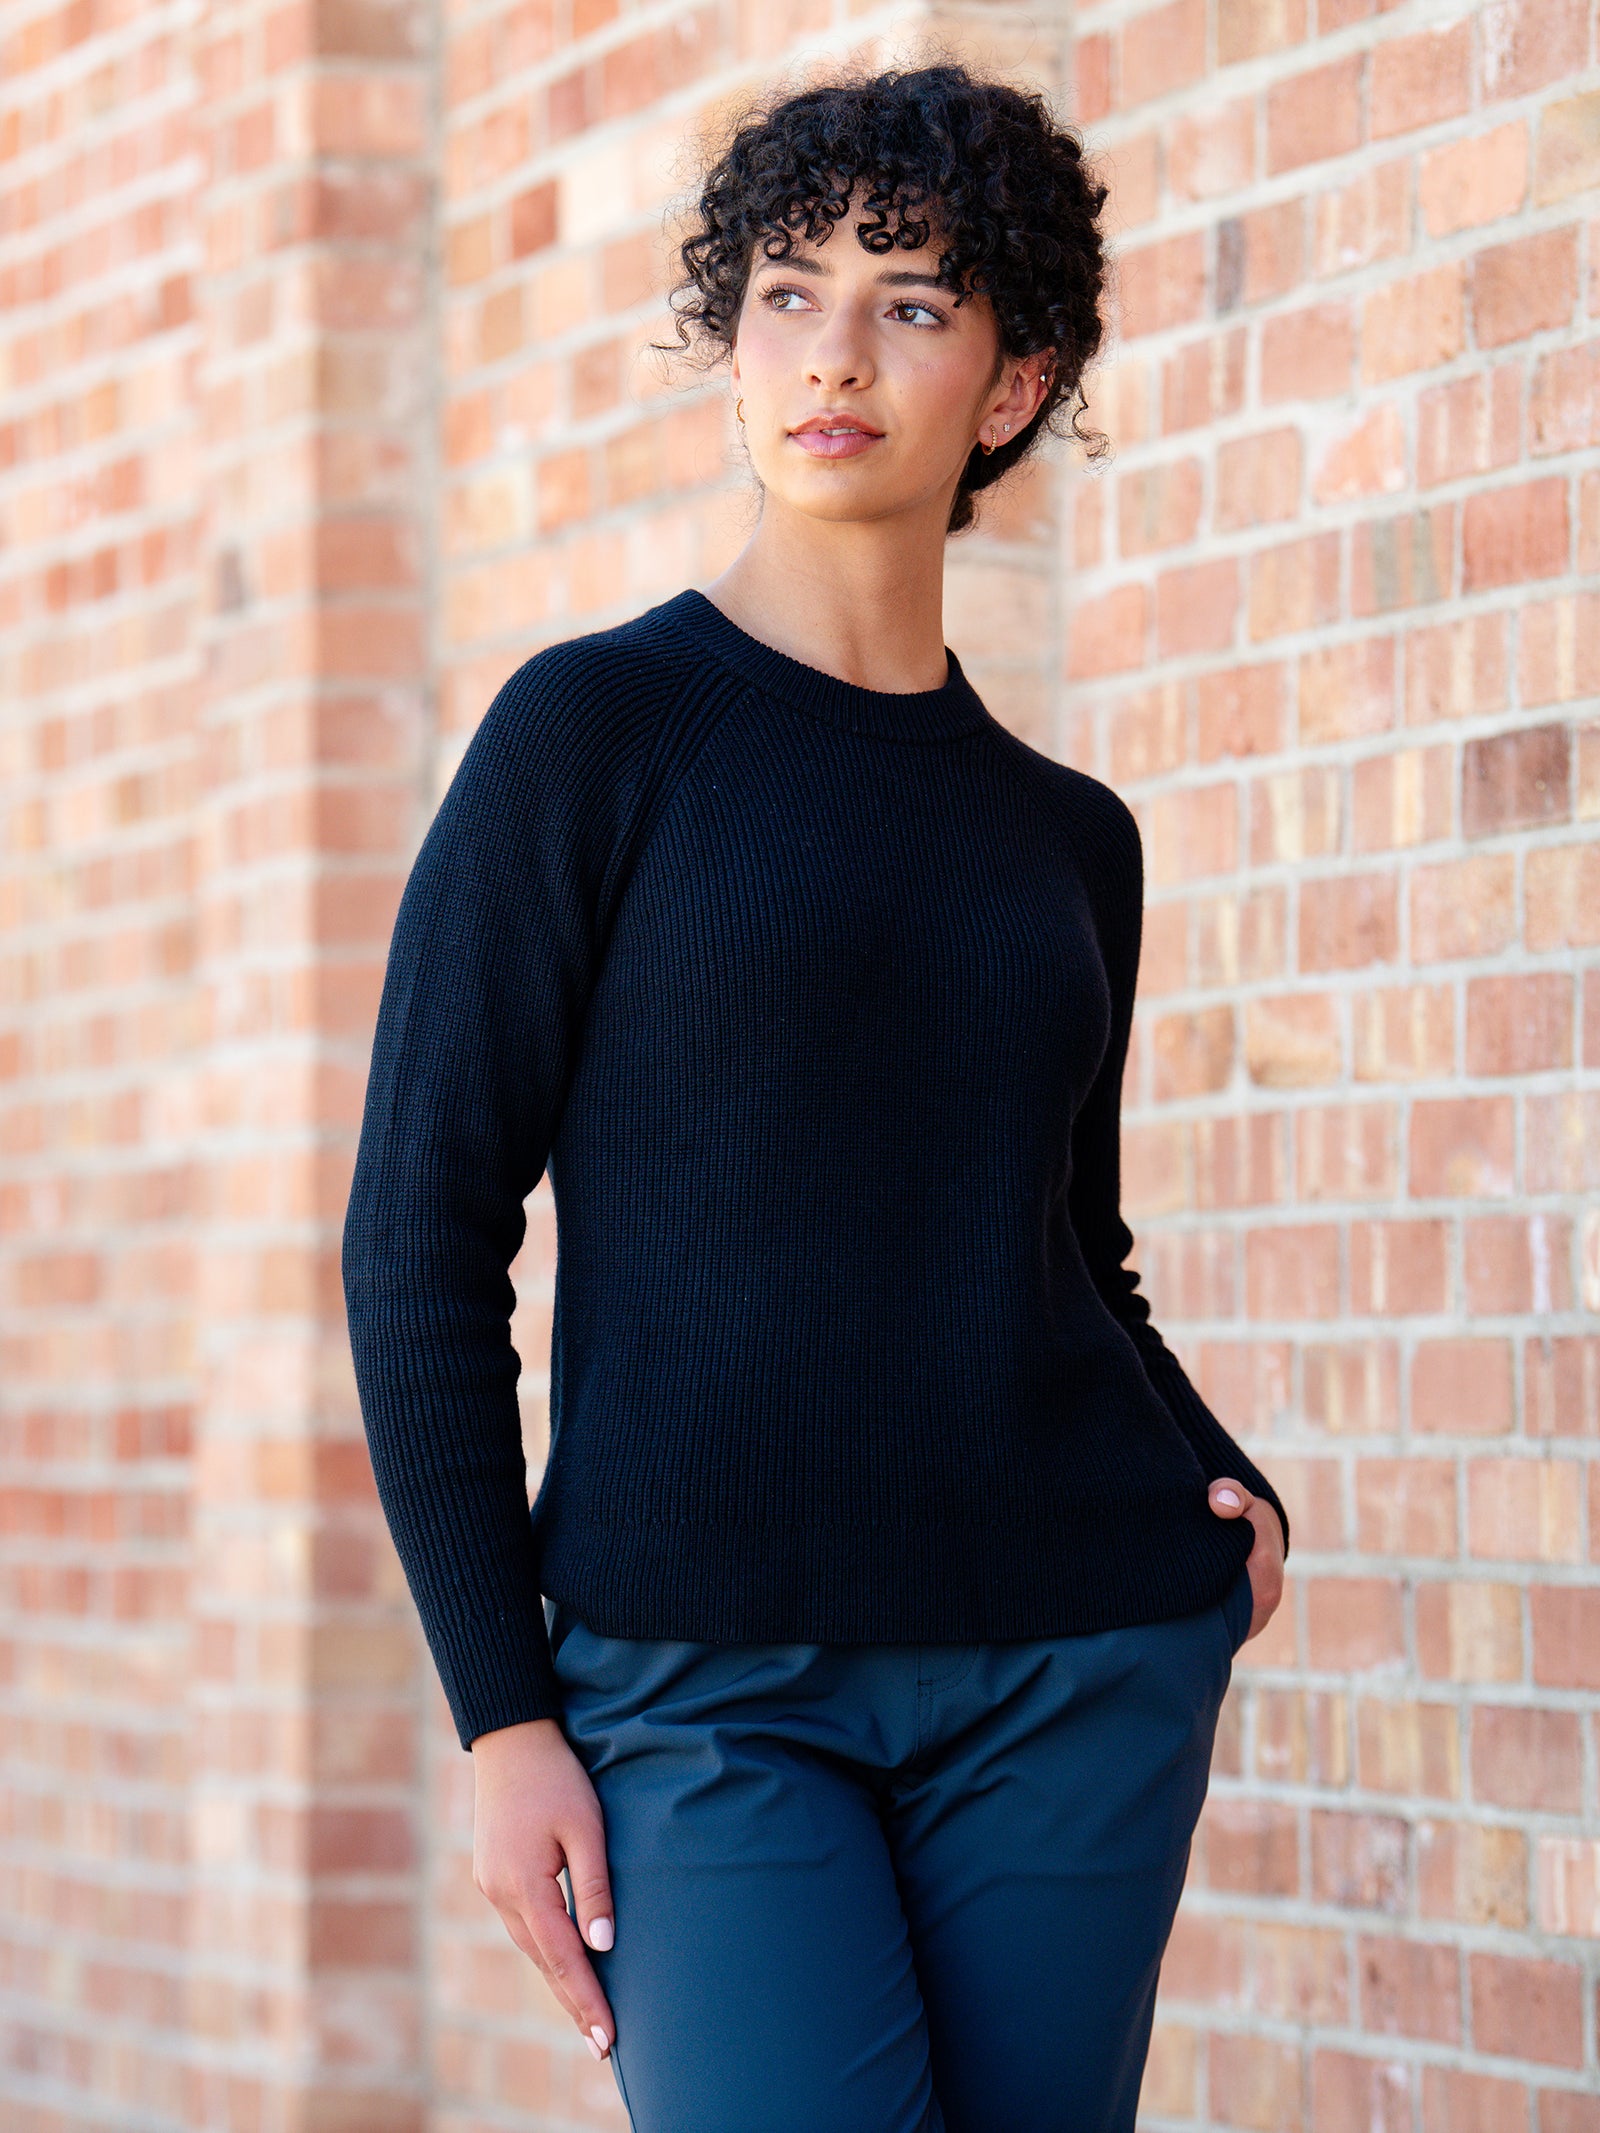 A person with curly hair is standing against a brick wall, looking to the side. They are wearing Cozy Earth's Women's Classic Crewneck in black and blue pants, with their hands in their pockets. The person has a contemplative expression. 